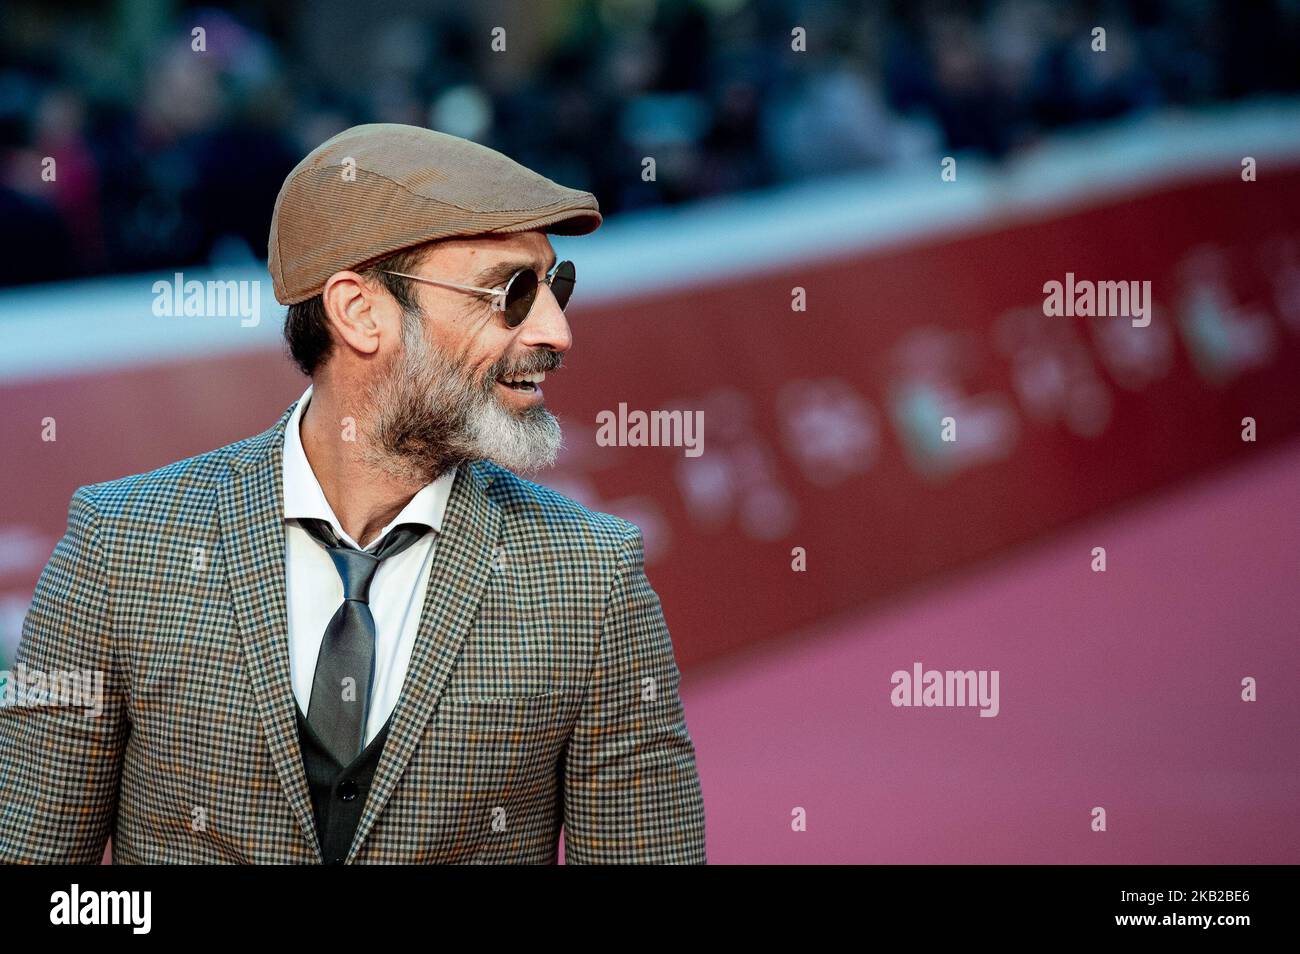 Actor and model Raz Degan attends the Red Carpet during the 13th Rome Film Fest at Auditorium Parco Della Musica on 22 October 2018. (Photo by Giuseppe Maffia/NurPhoto) Stock Photo